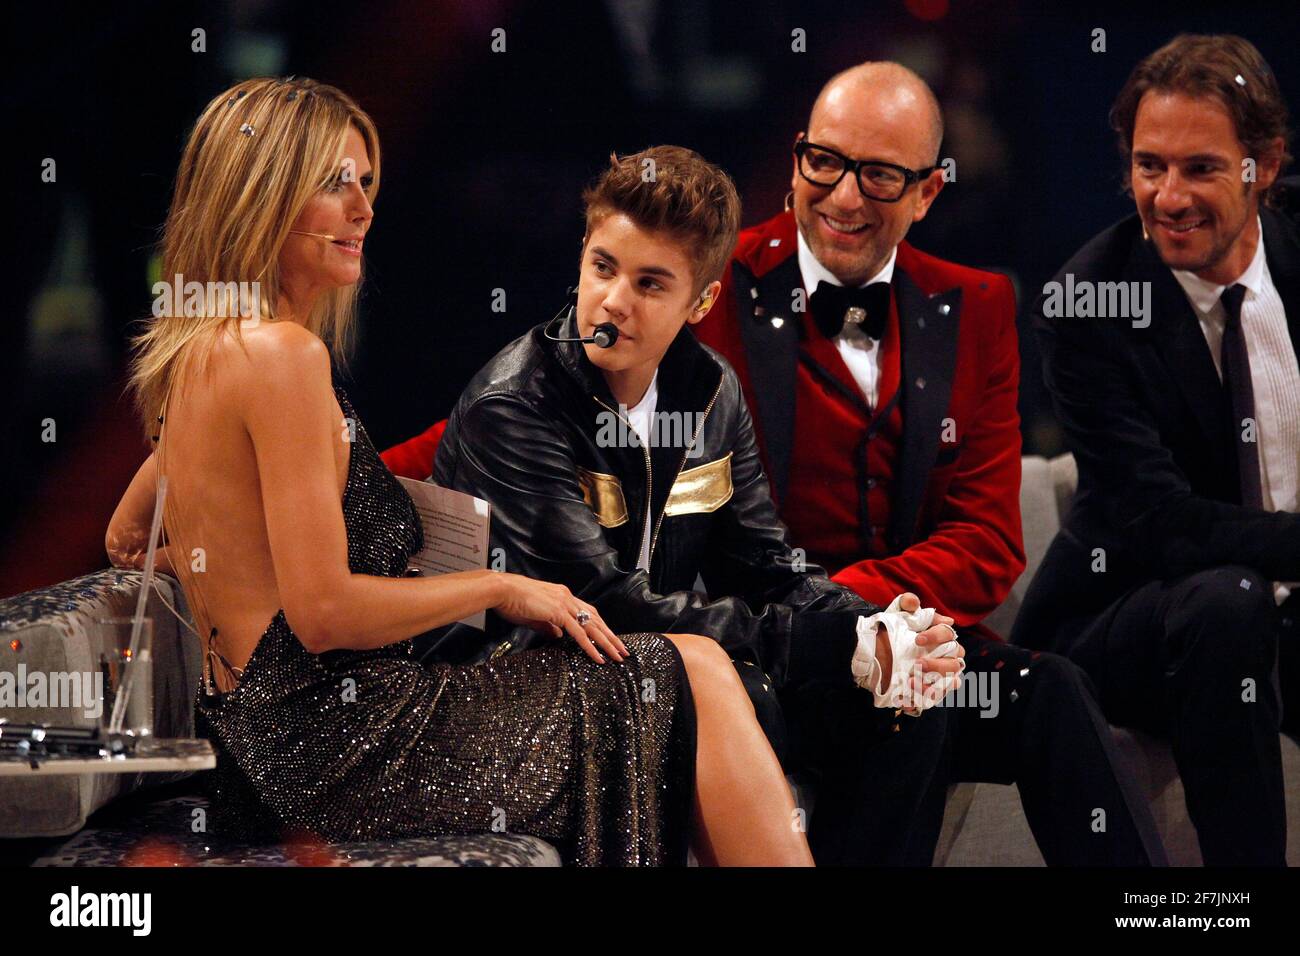 Heidi Klum, Justin Bieber, Thomas Rath and Thomas Hayo attending Germanys  Next Top Model Finale (GNTM 2012 FINALE) in the Lanxess Arena, Cologne, Ger  Stock Photo - Alamy